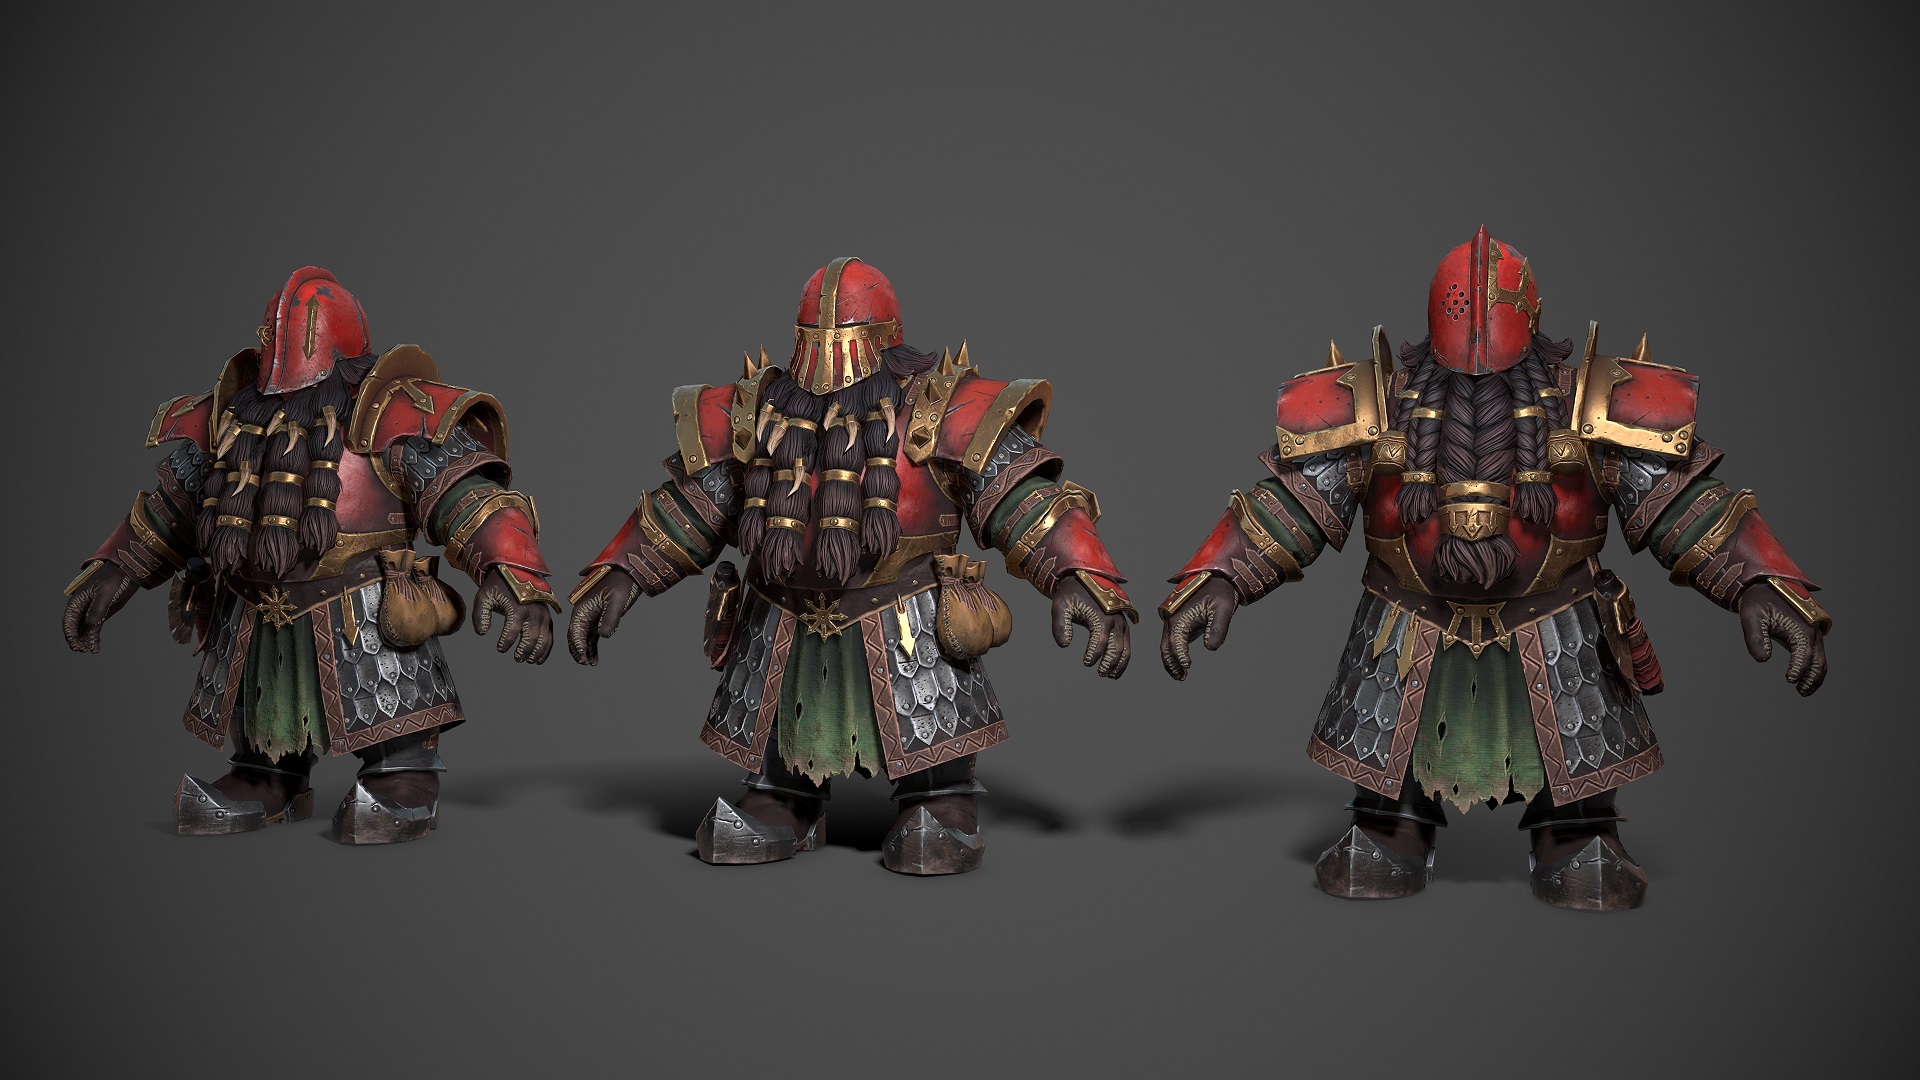 Forge of the Chaos Dwarfs: Introducing Drazhoath the Ashen - Total War